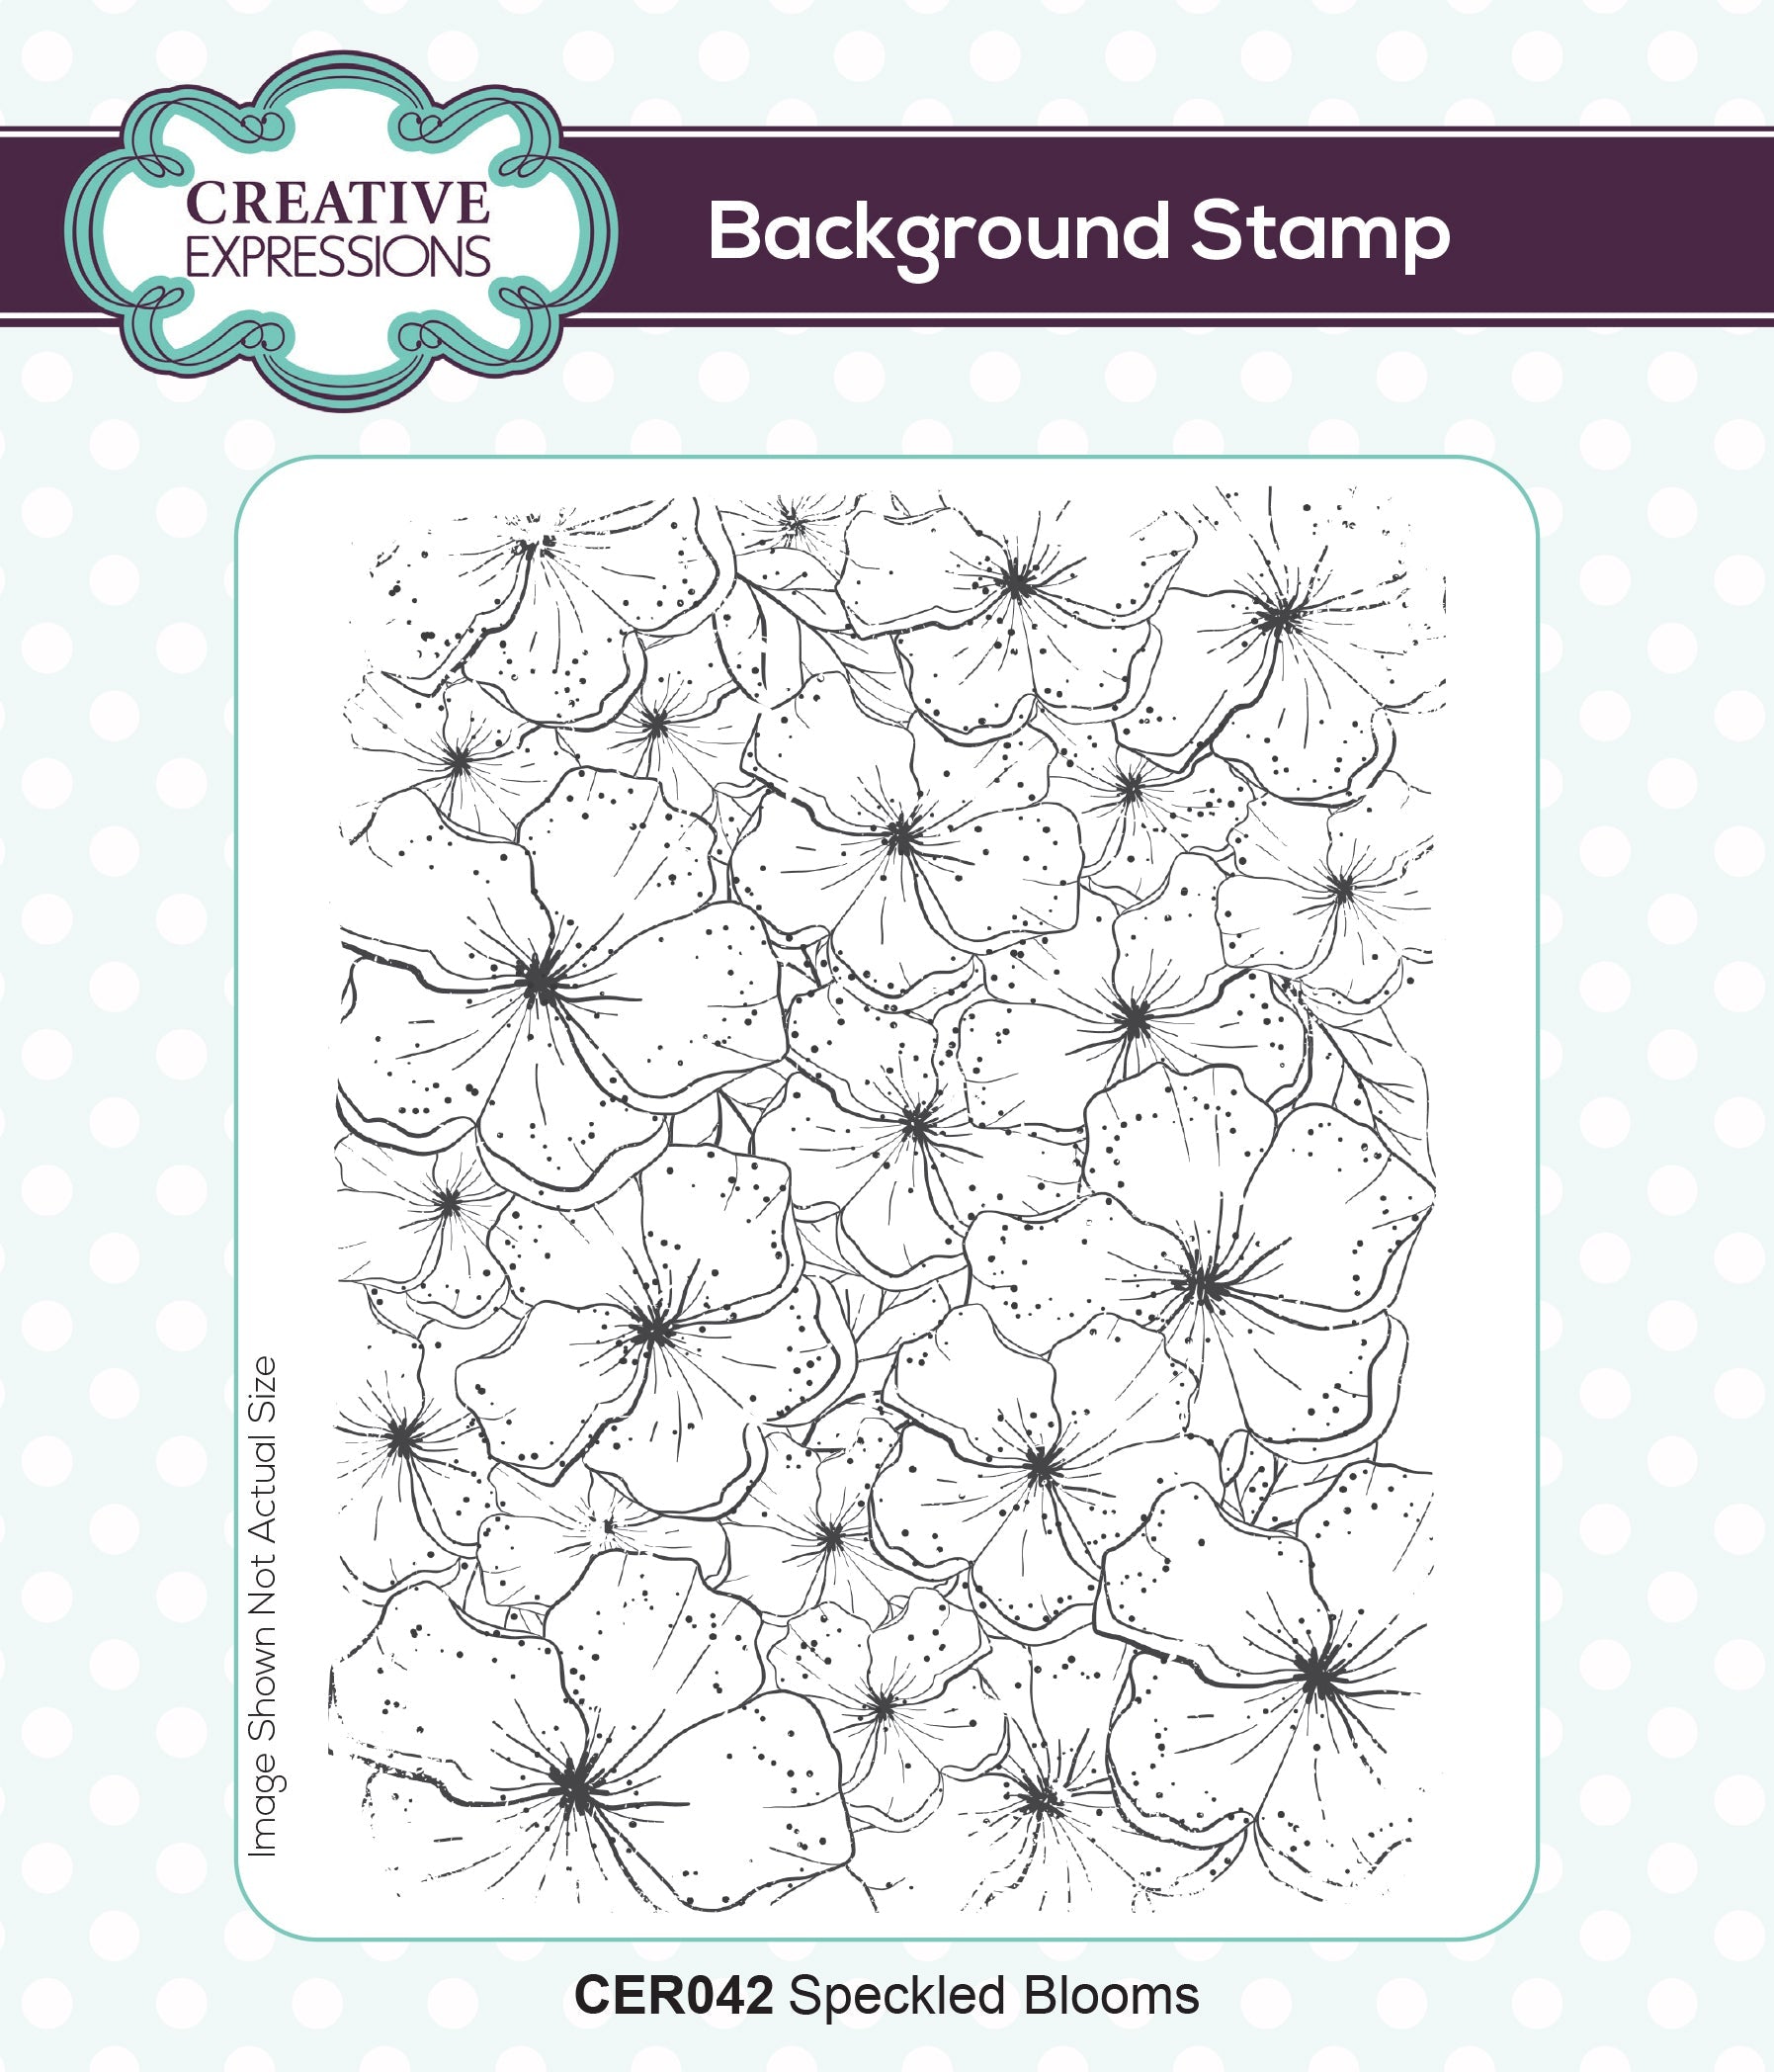 Creative Expressions Speckled Blooms 5 3/4 in x 4 I/2 in Rubber Stamp